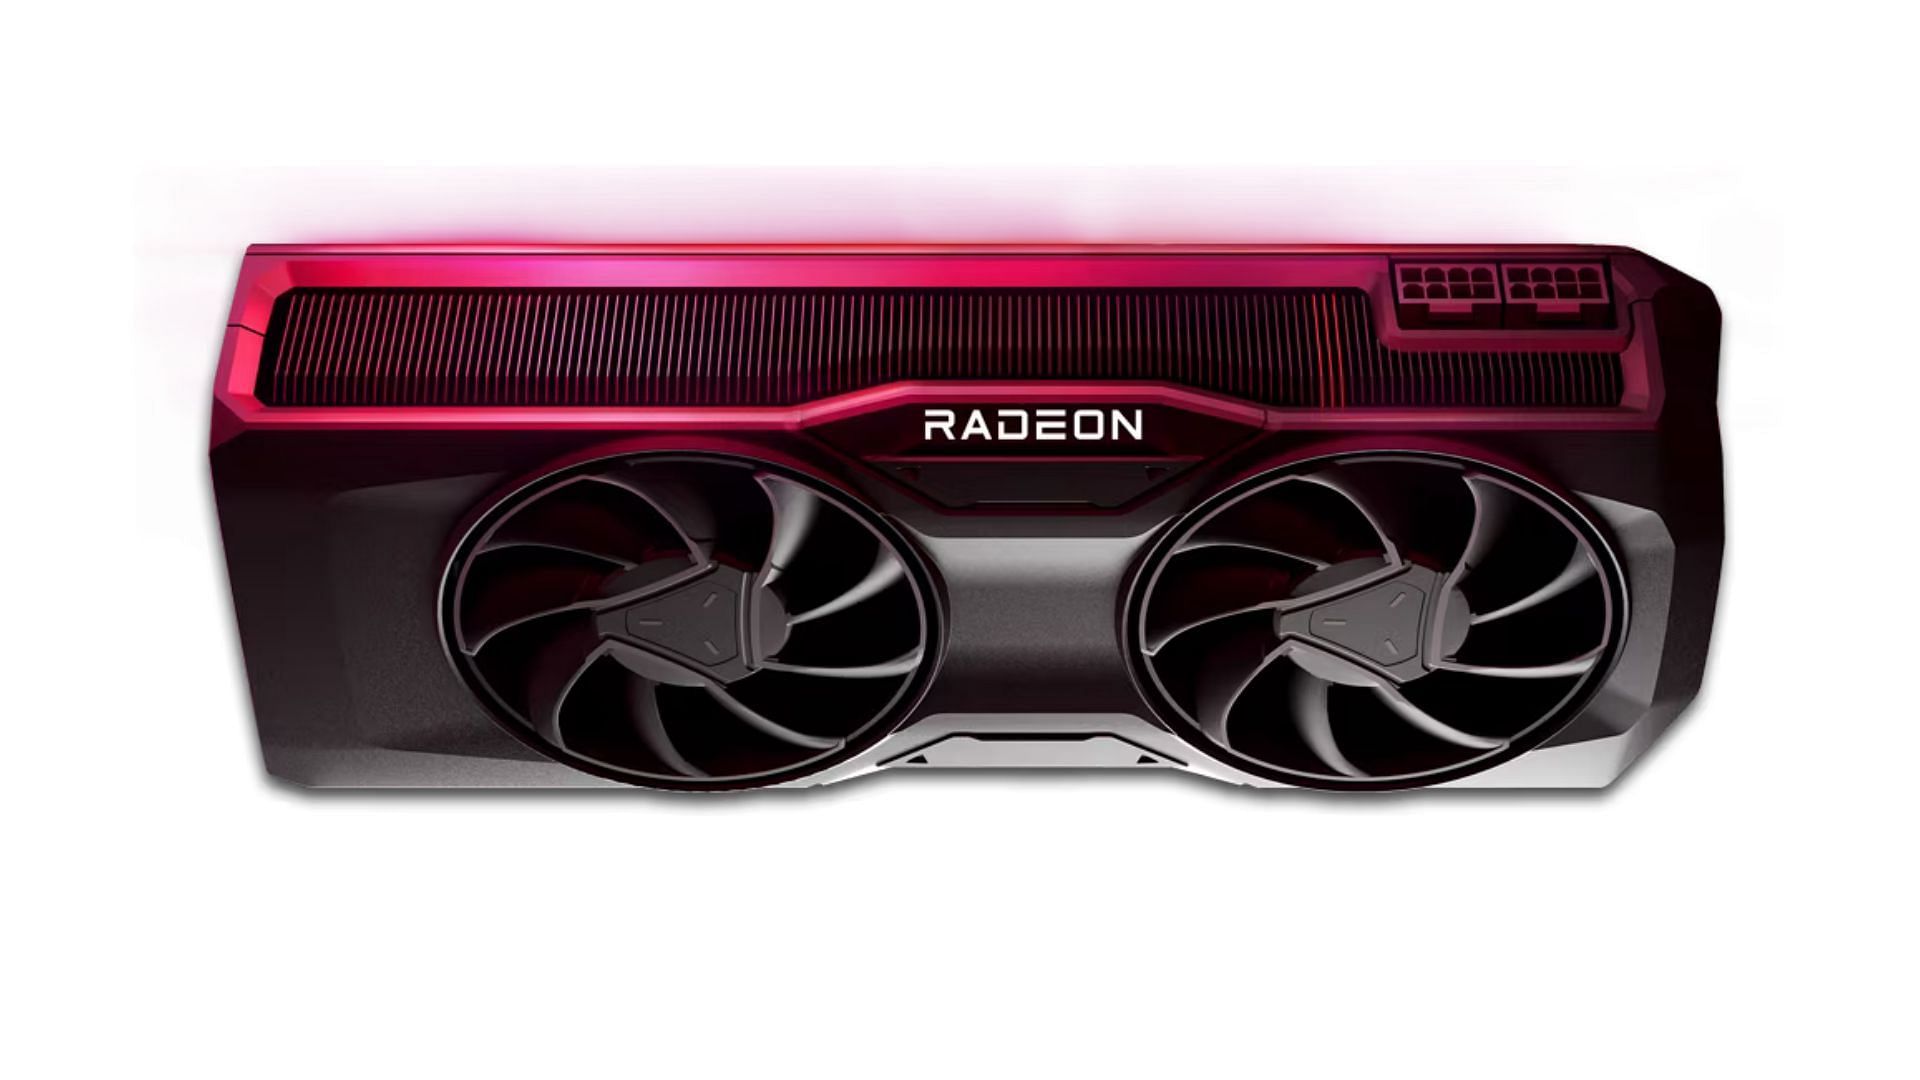 The AMD Radeon RX 7800 XT packs significant rendering prowess in the latest games (Image via AMD)